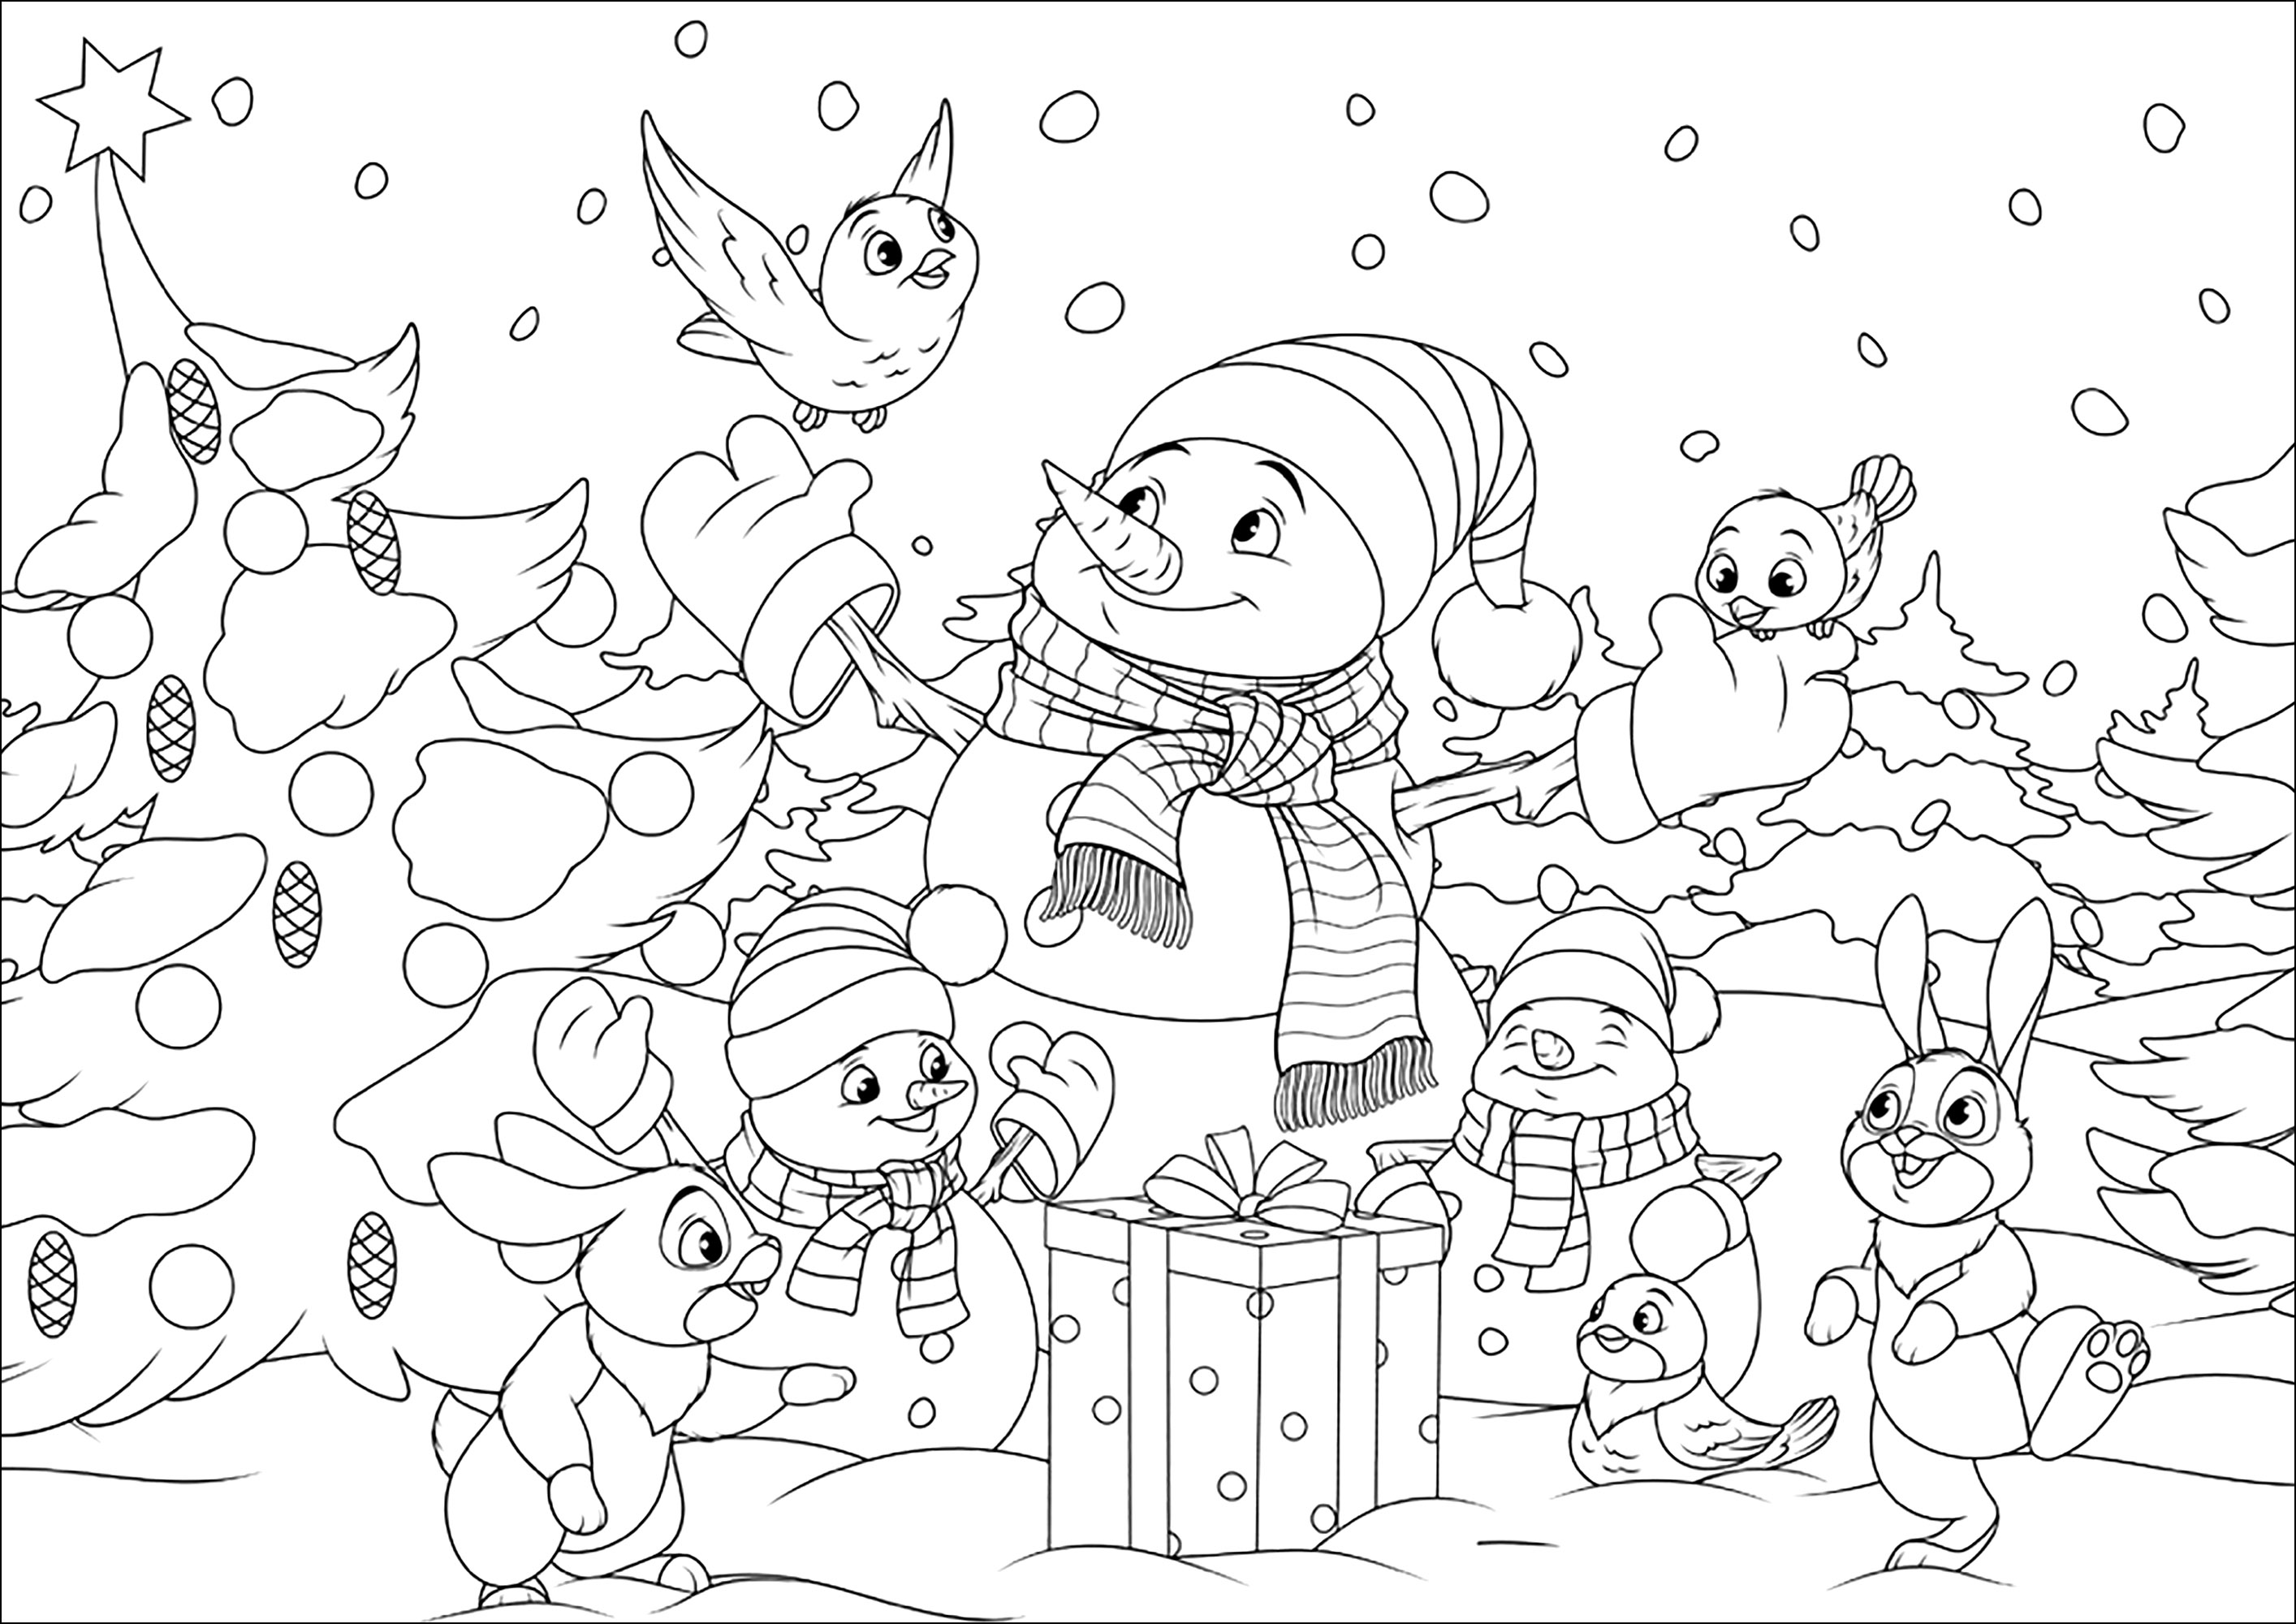 Snowmen and their forest friends. Color these pretty snowmen and their bunny and bird friends in a snowy Christmas landscape, Source : 123rf   Artist : Andrey1978